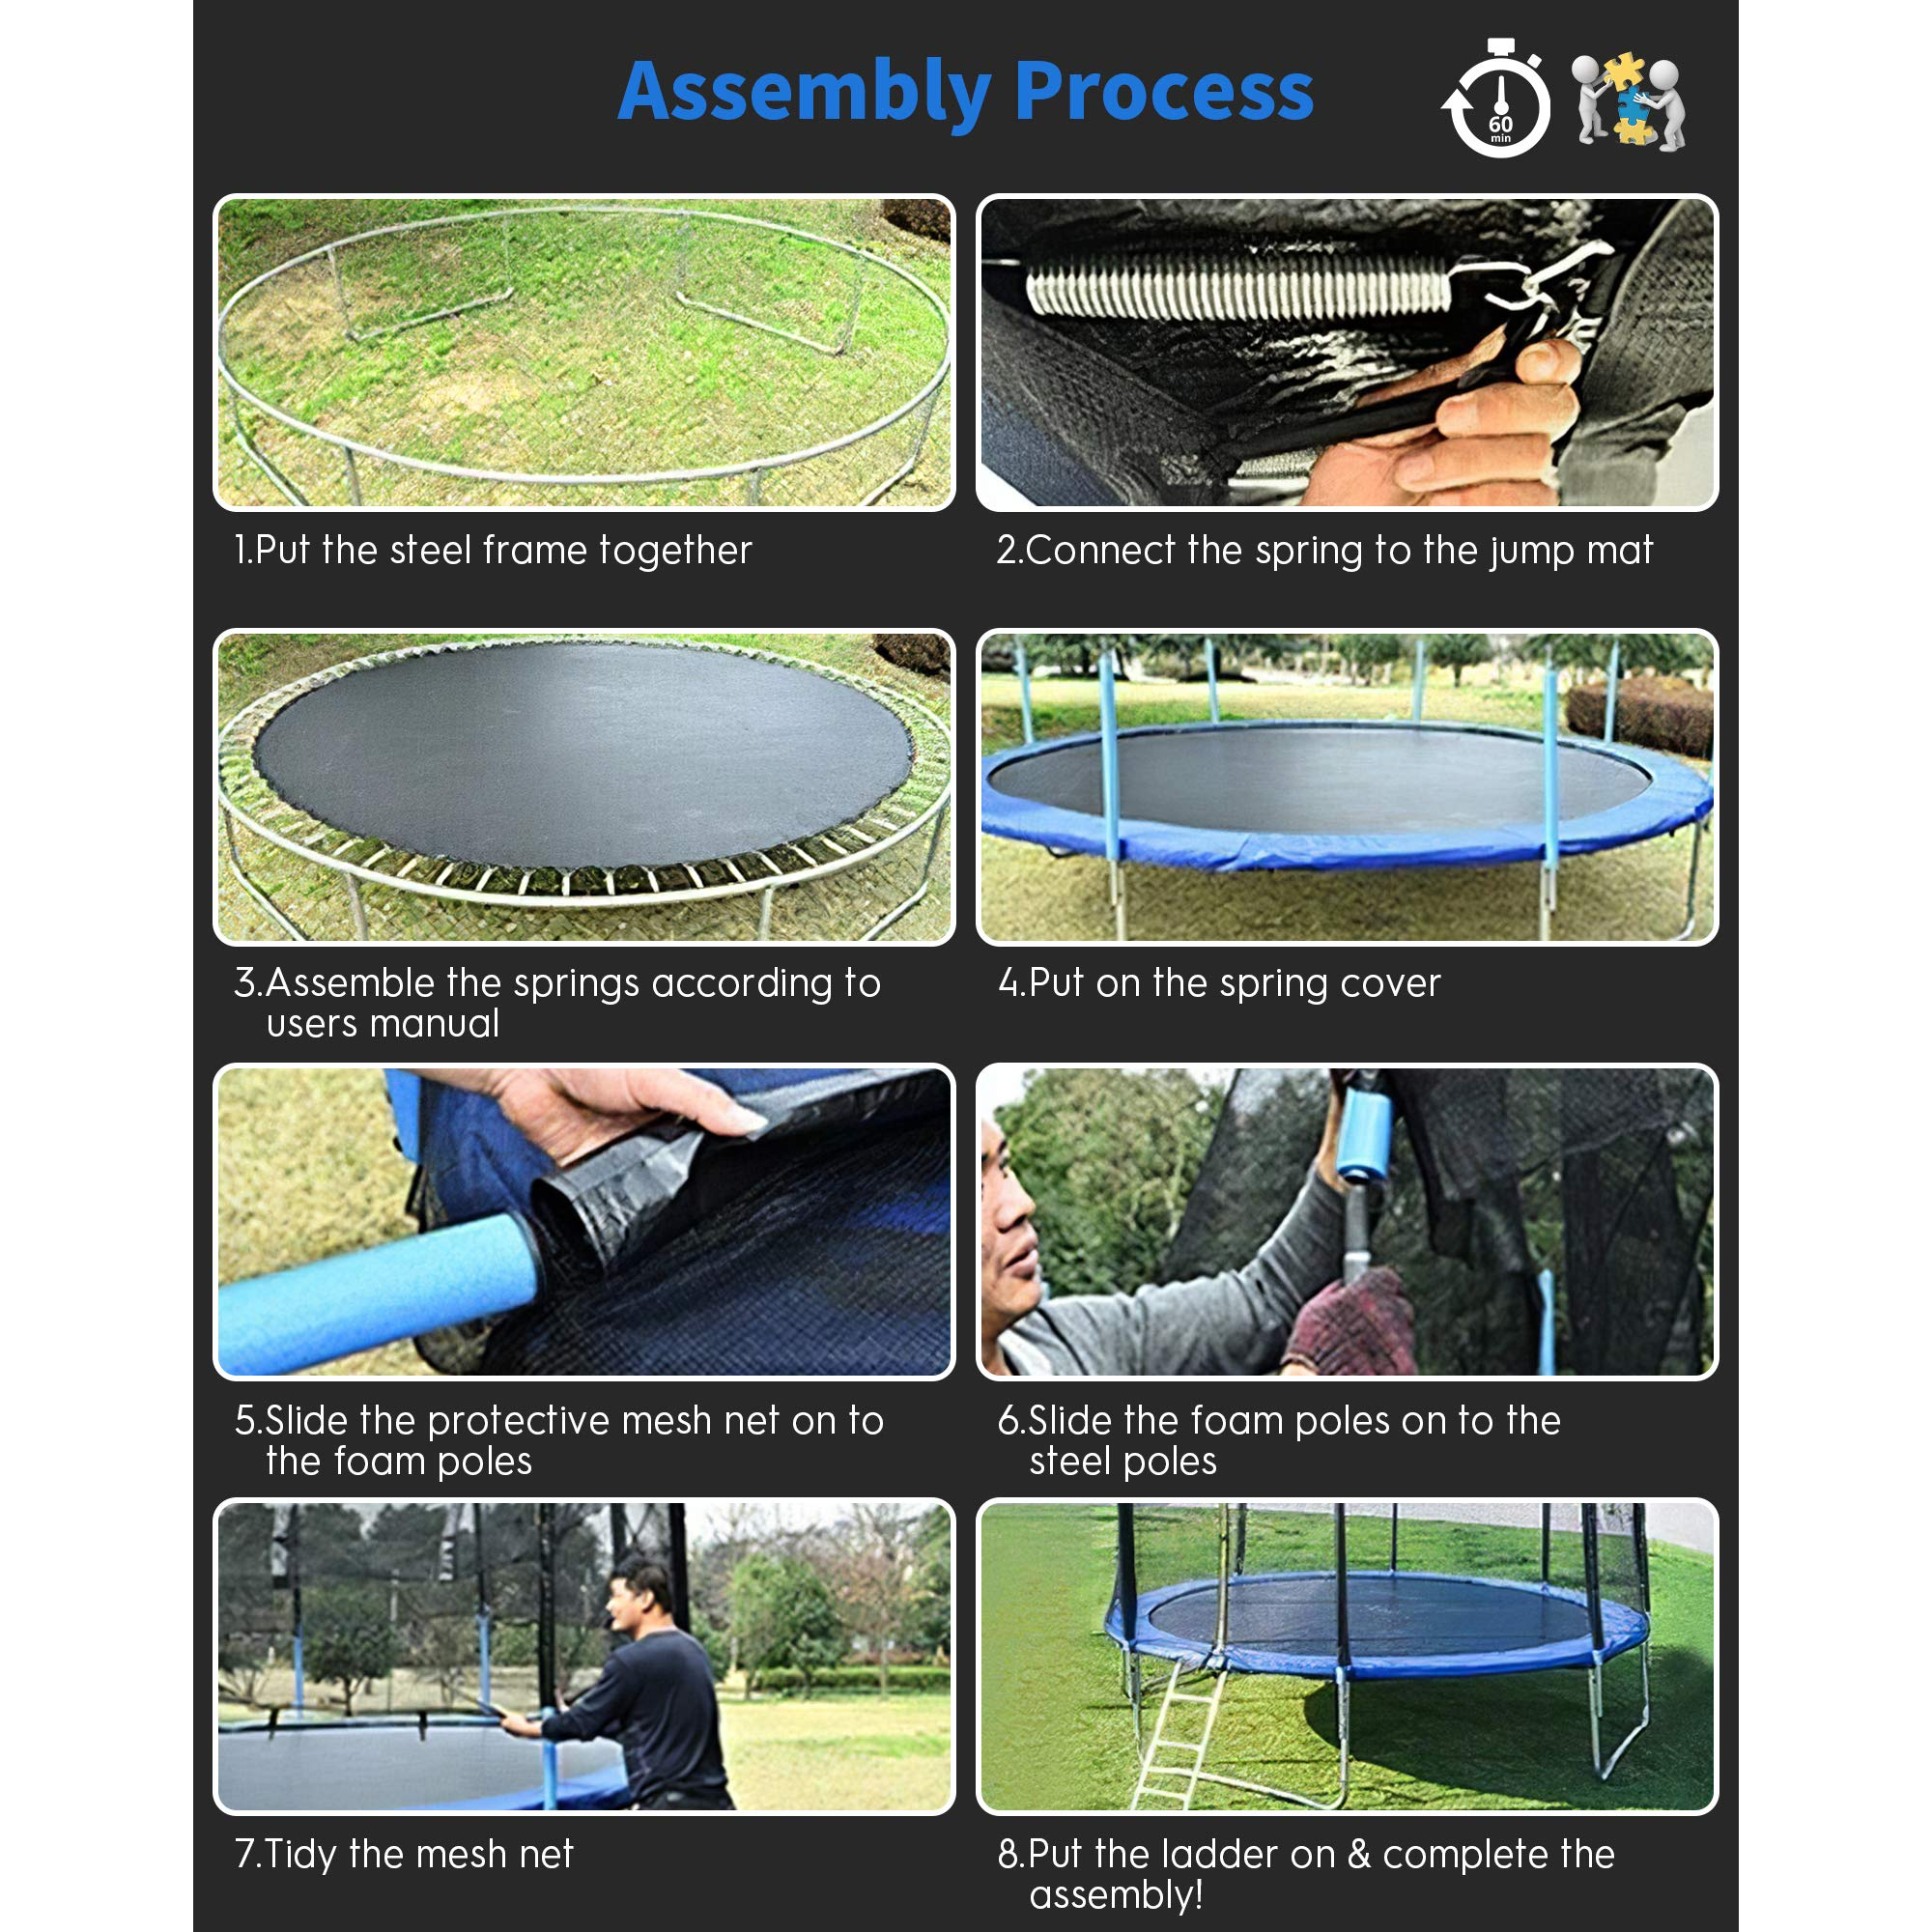 Maxkare 14FT Trampoline with Safety Enclosure, Low Intensity Weight Capacity 450lbs, for Kids Adults Outdoor